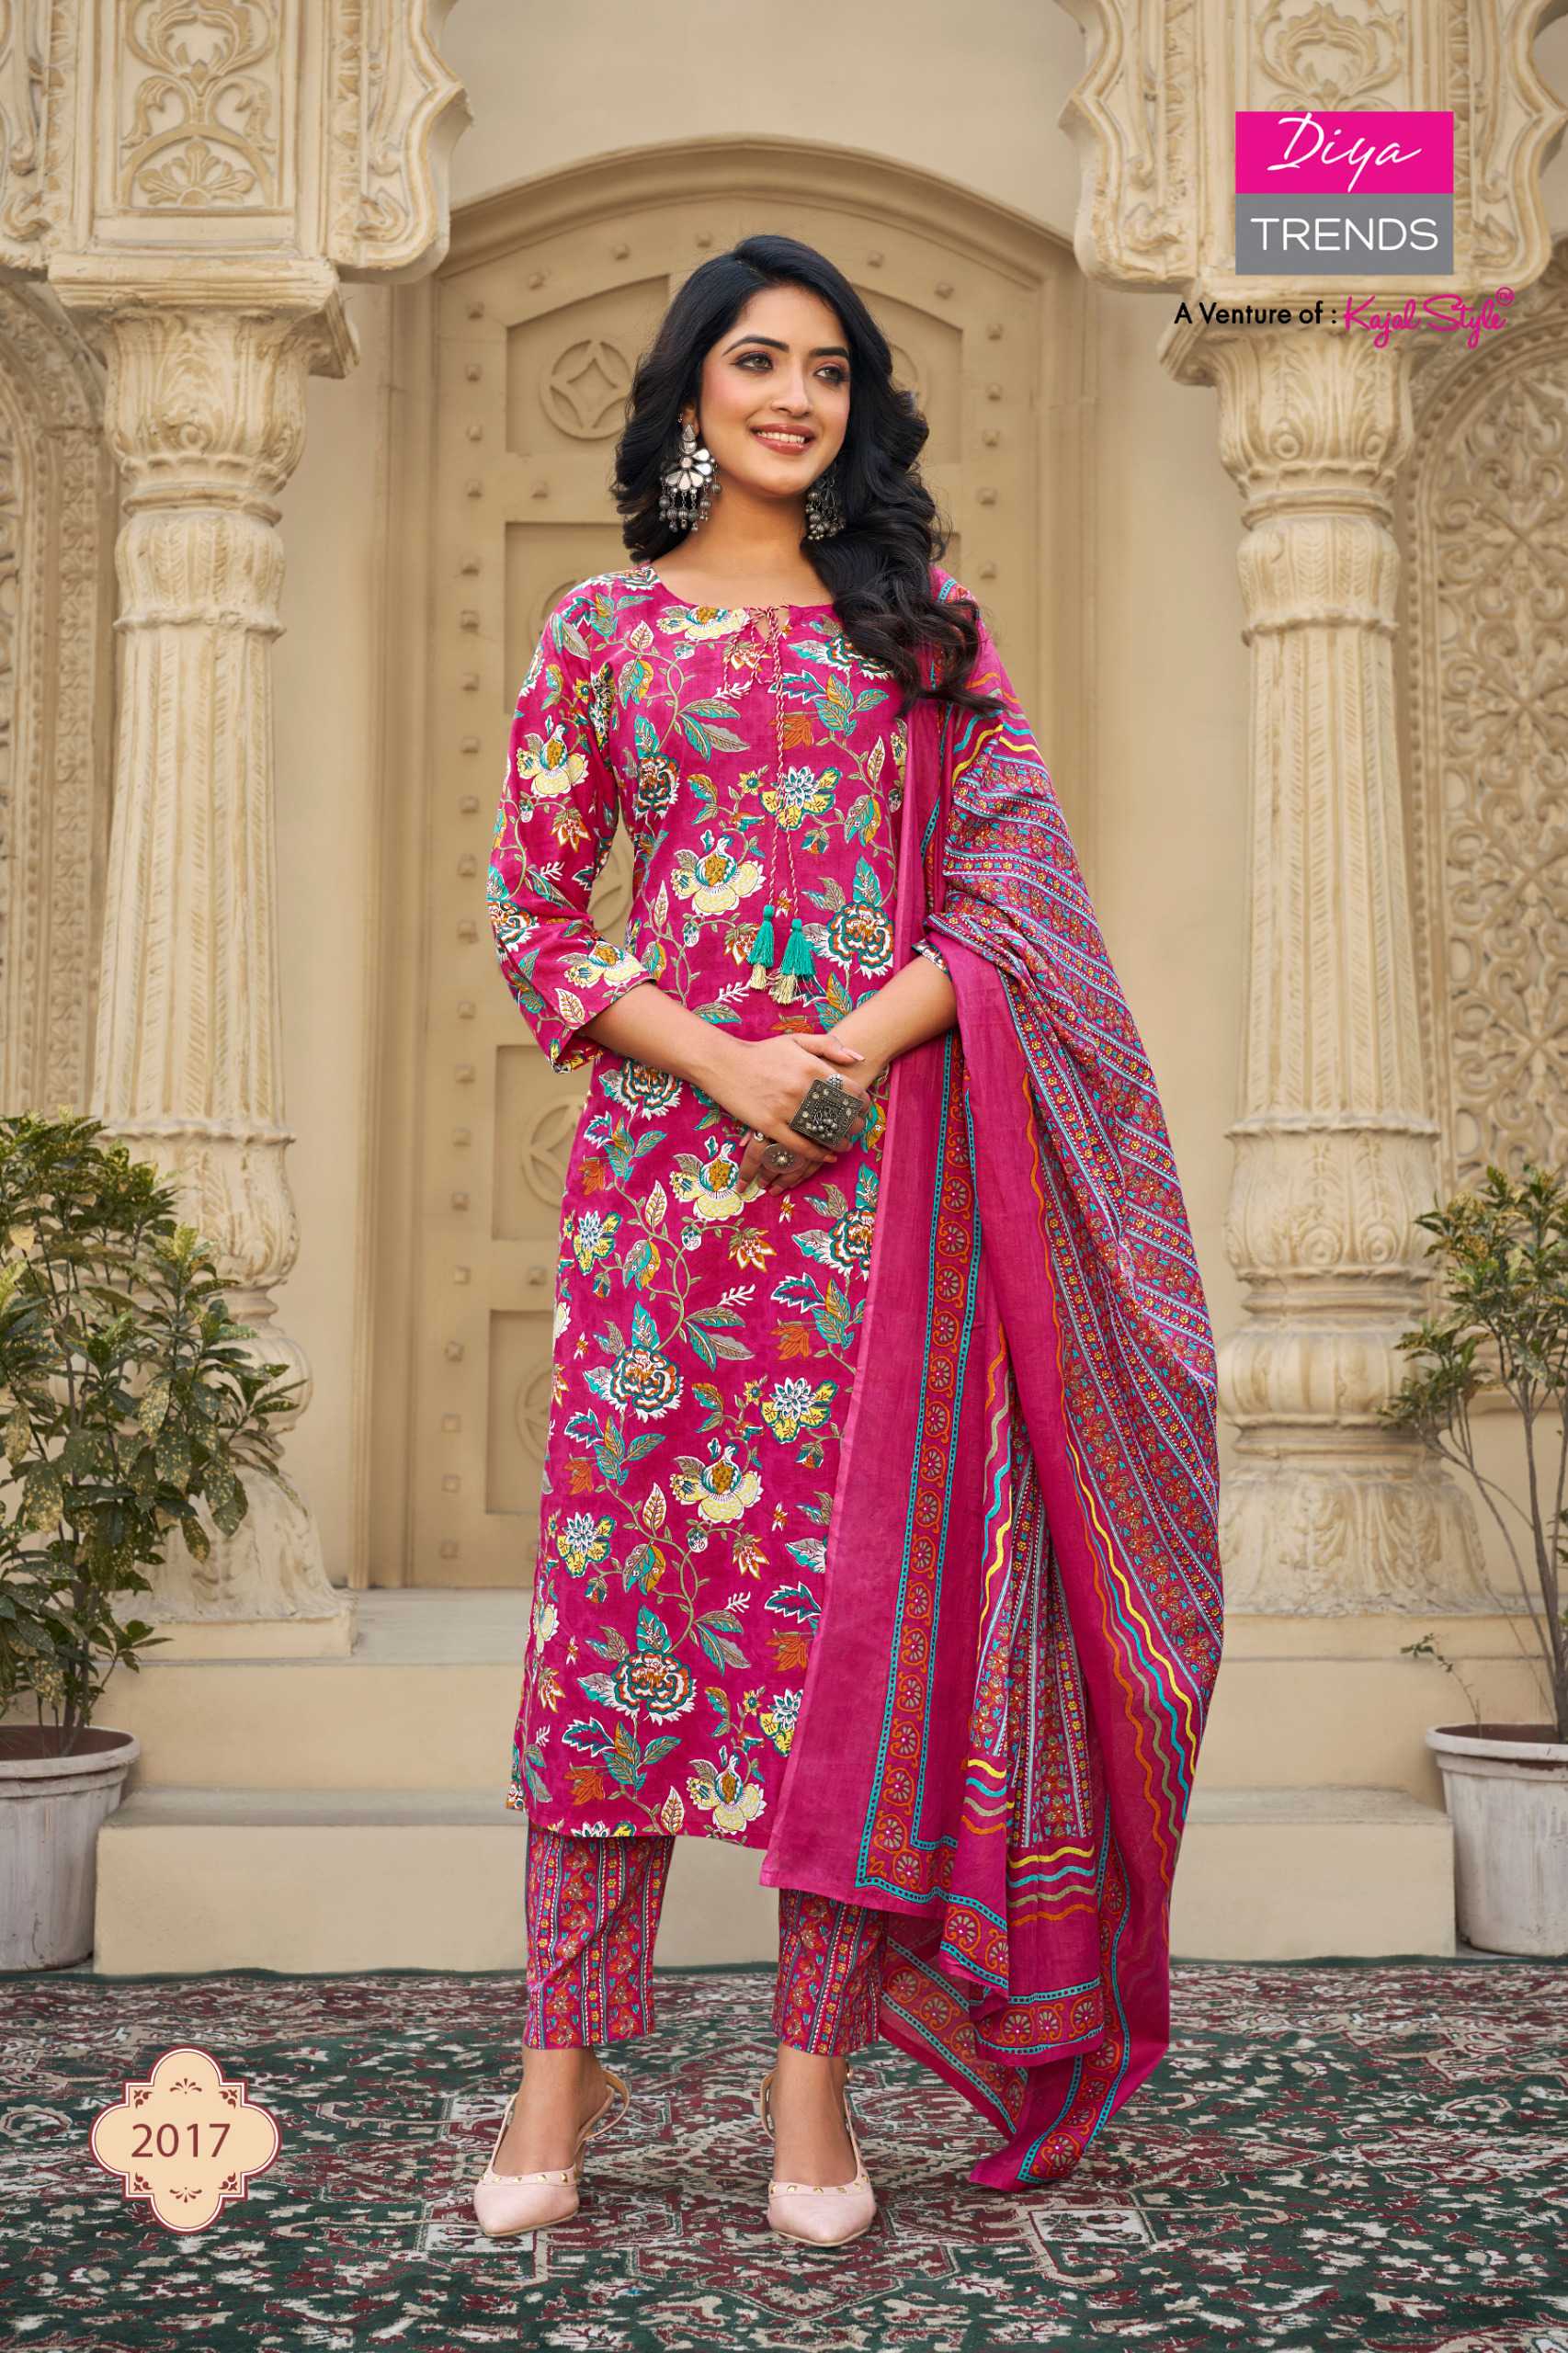 ODHANI BY DIYA TRENDS READYMADE SUITS